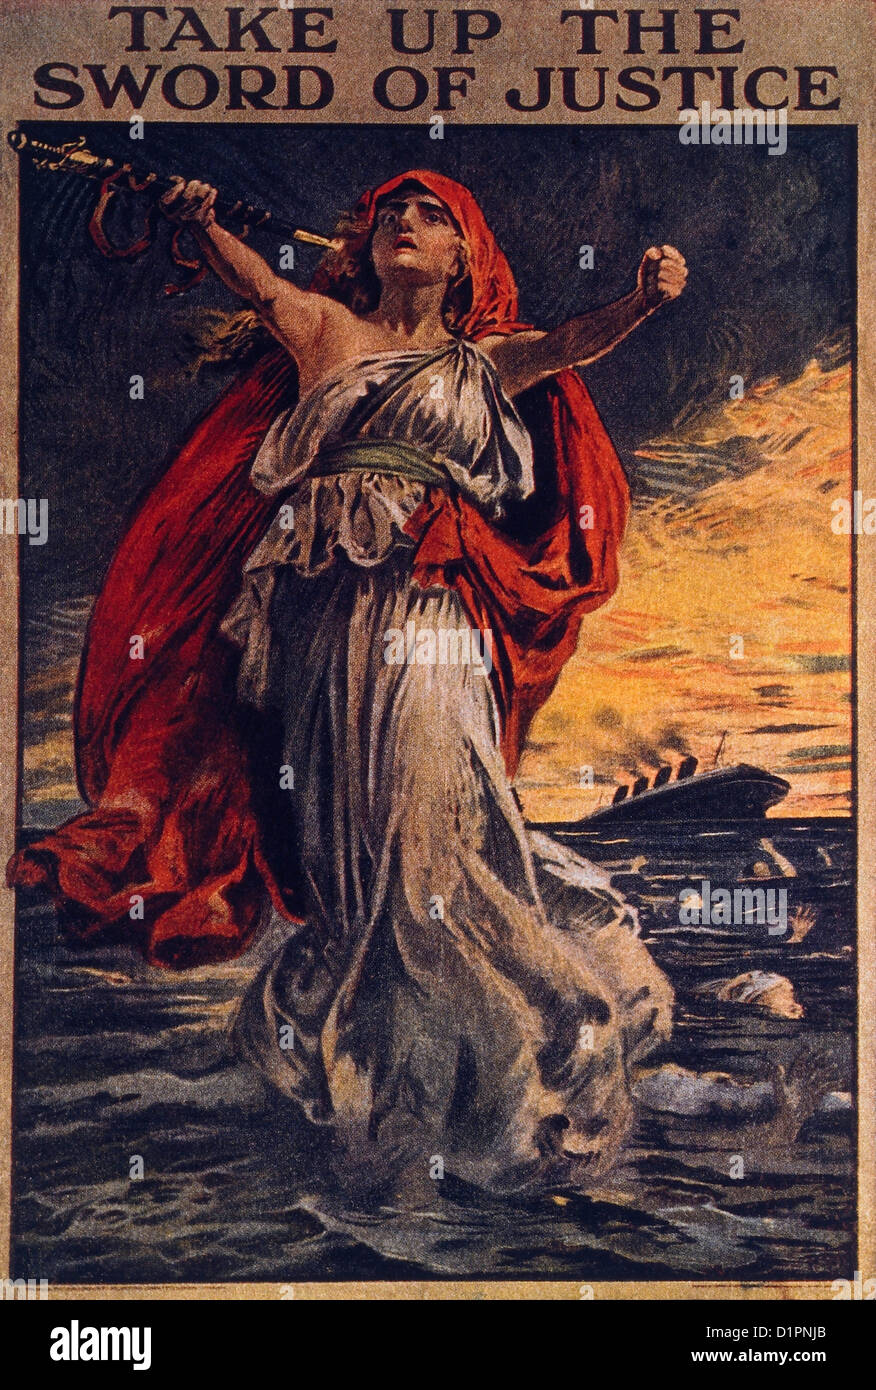 Take Up The Sword of Justice, British War Poster Related to the Sinking of the RMS Lusitania by a German U-Boat, 1915 Stock Photo